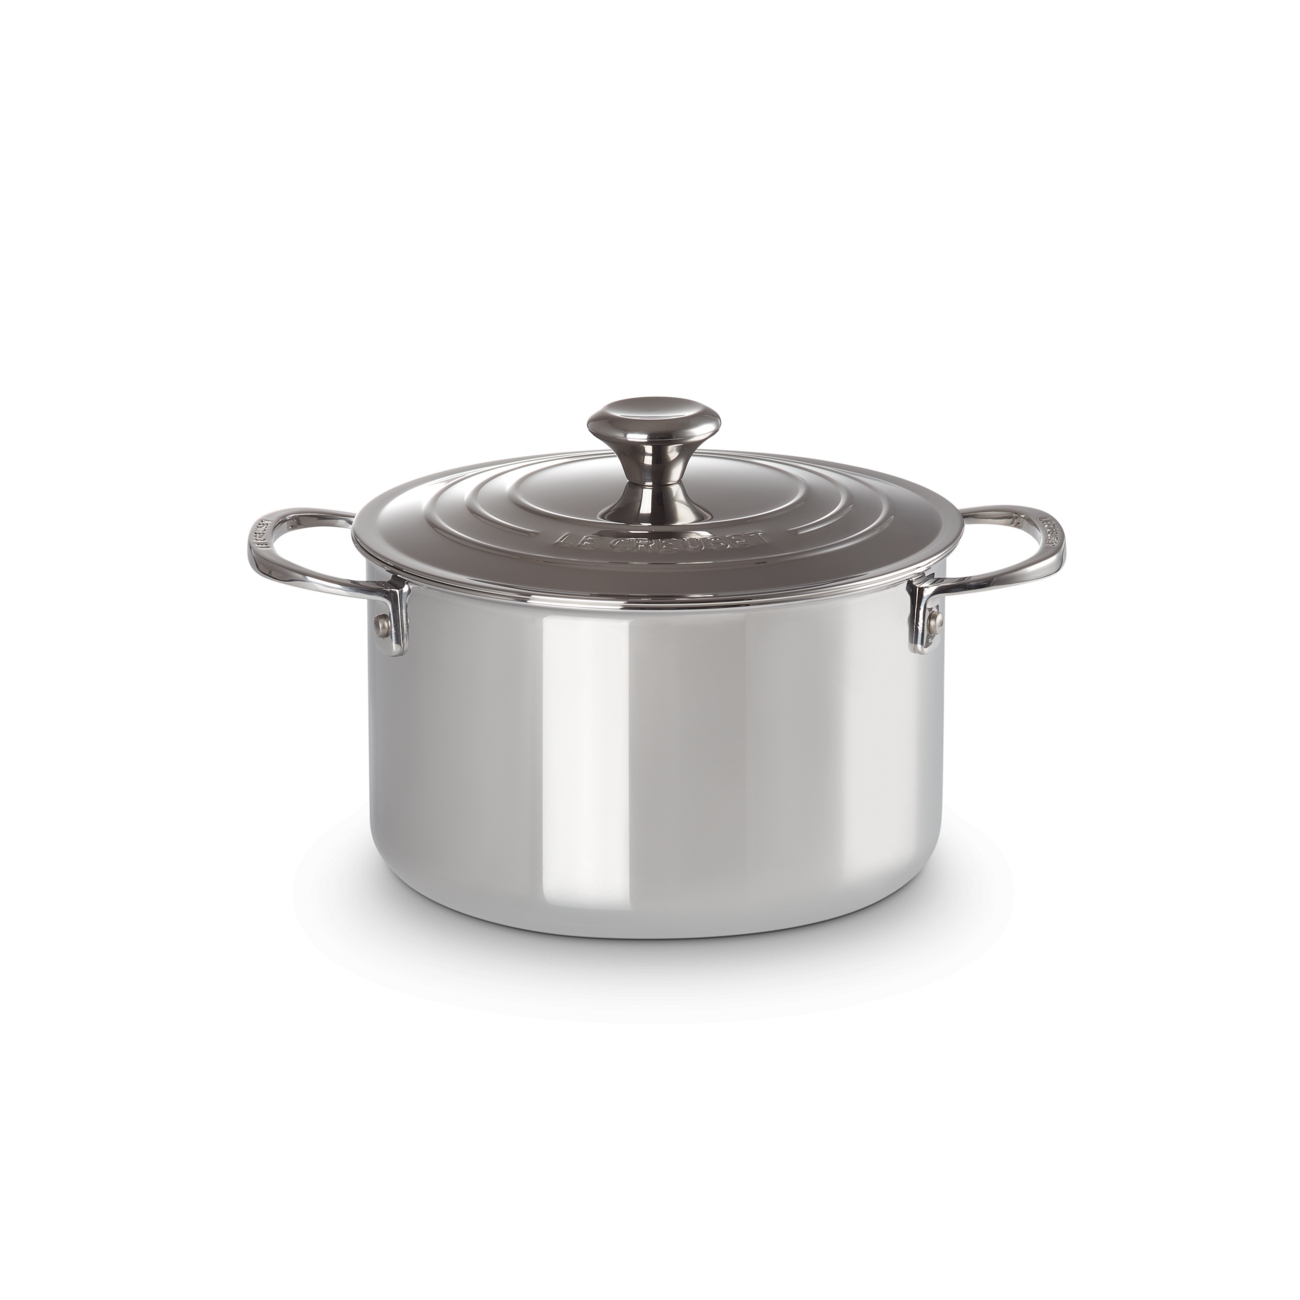 https://www.tattahome.com/53084-large_default/le-creuset-signature-stainless-steel-deep-casserole-with-lid-24.jpg